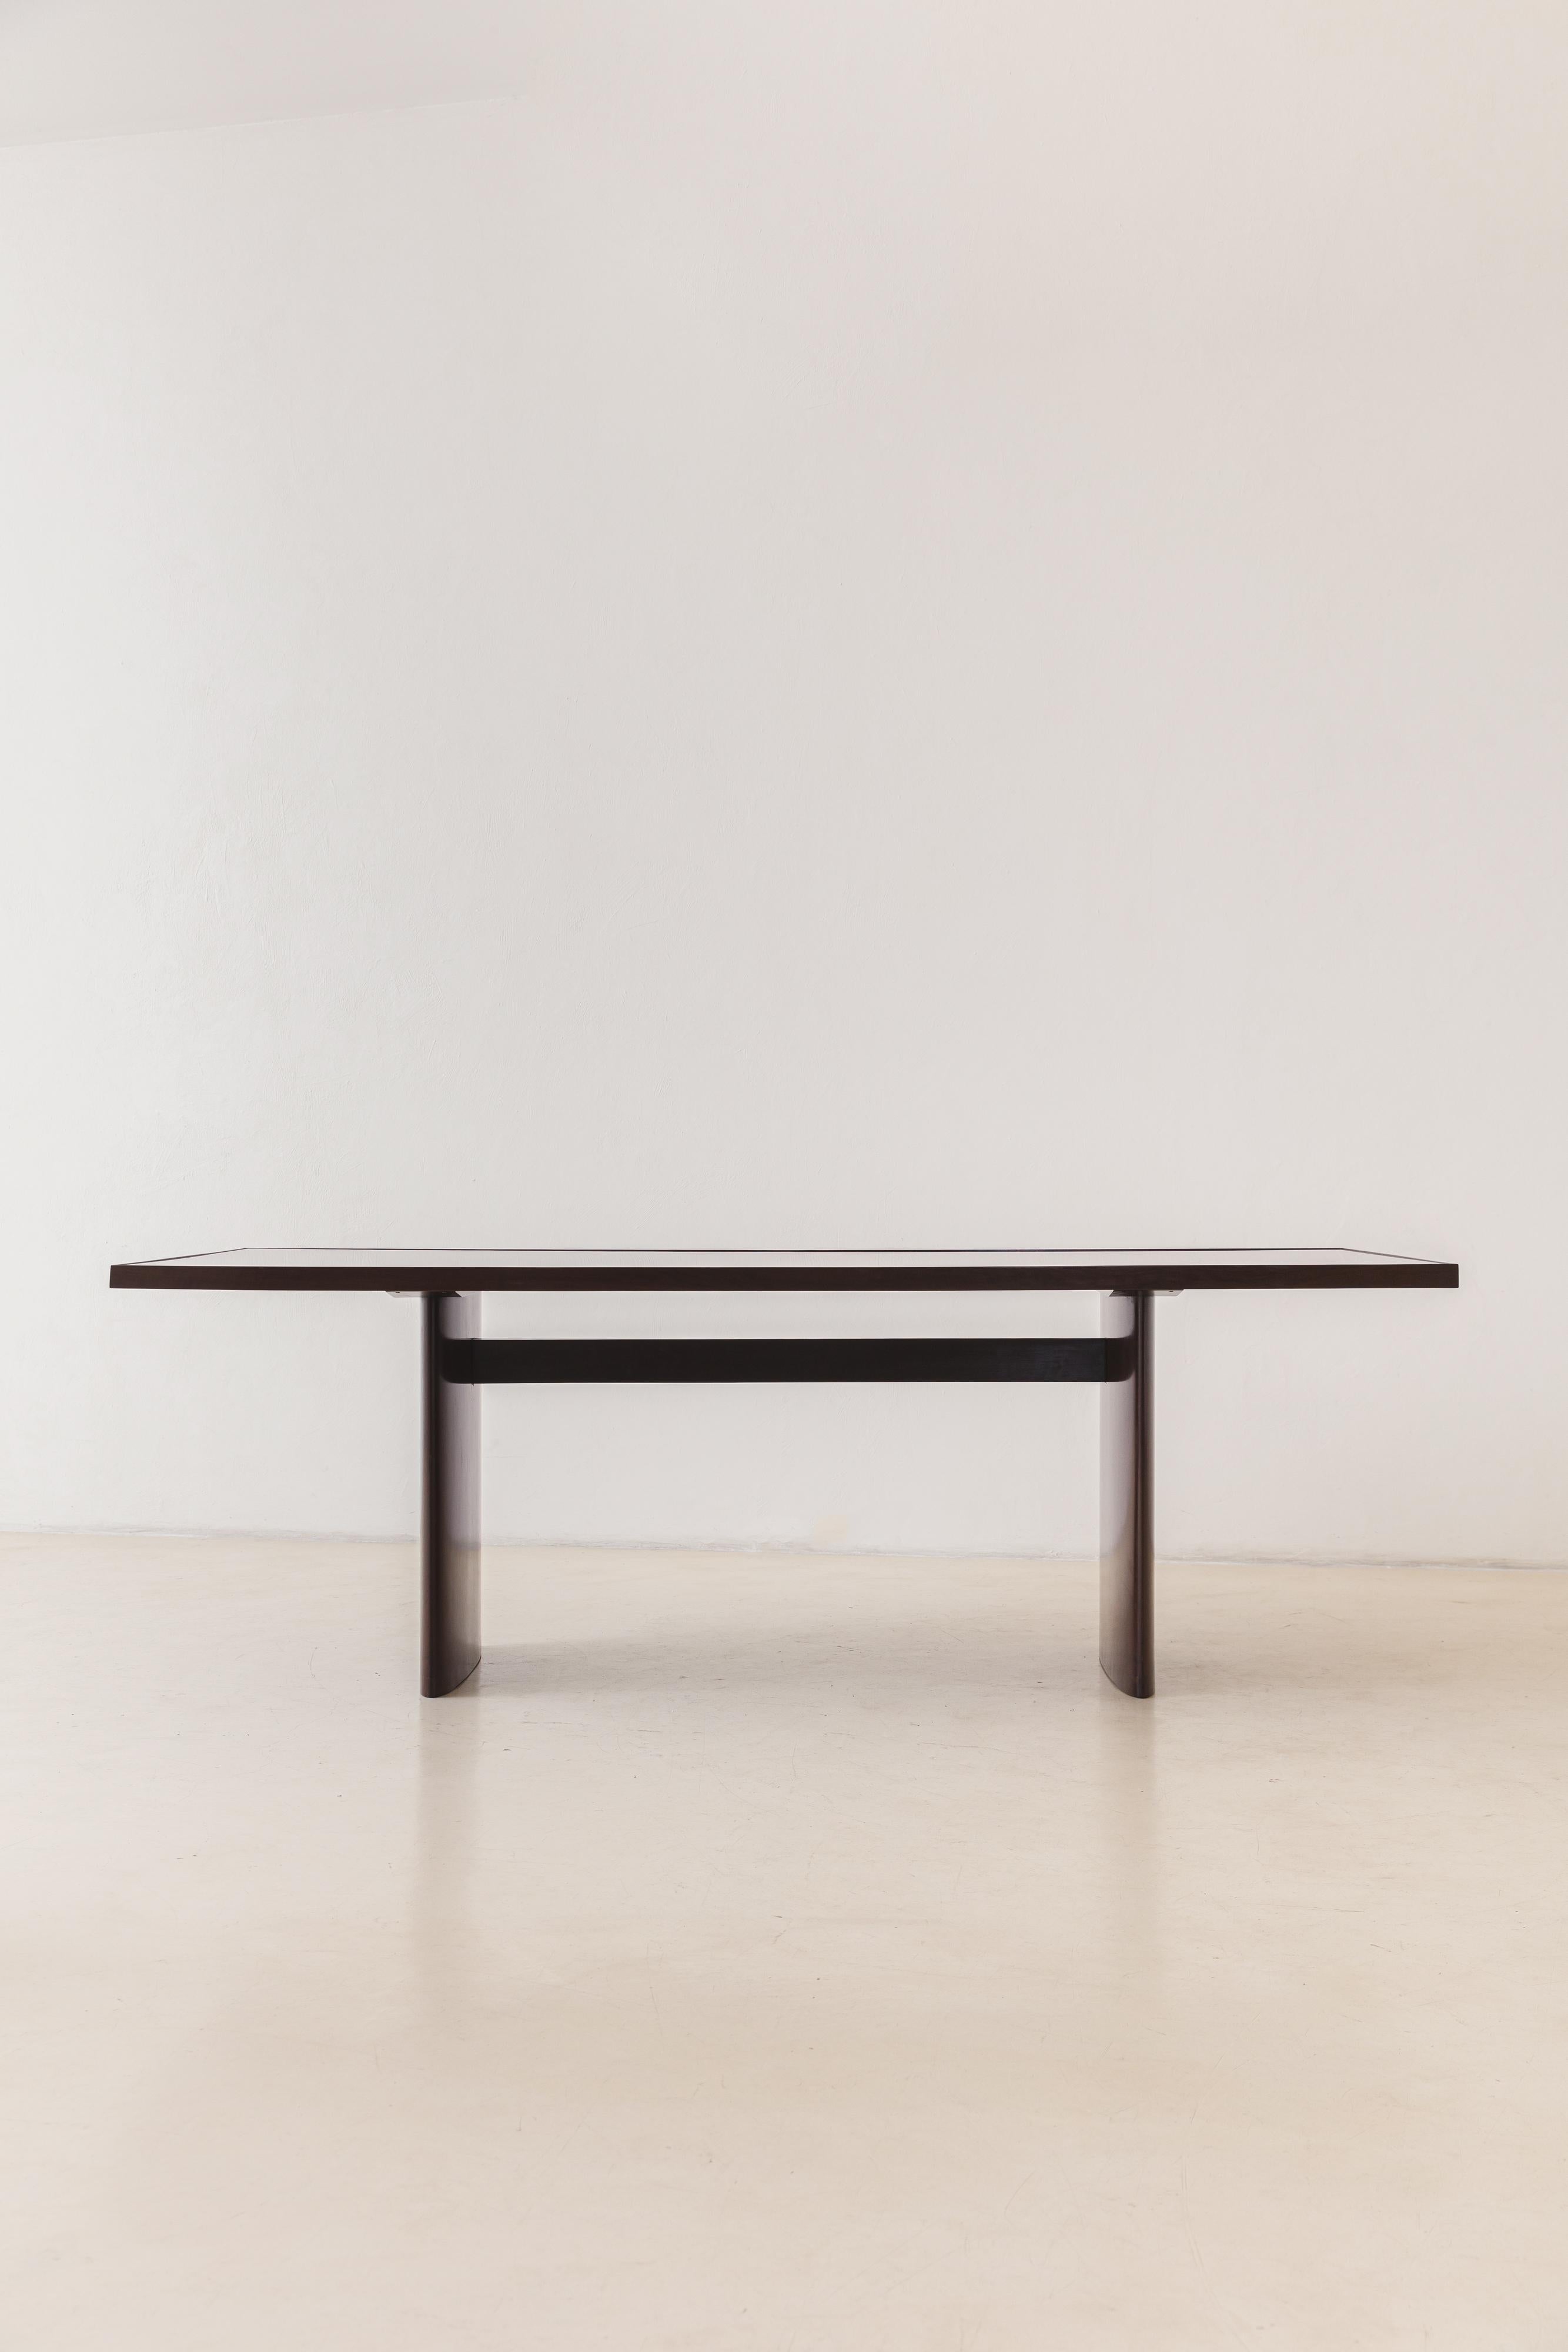 Brazilian Solid Imbuia with Red Glass Top Dining Table by Joaquim Tenreiro, Brazil C. 1949 For Sale